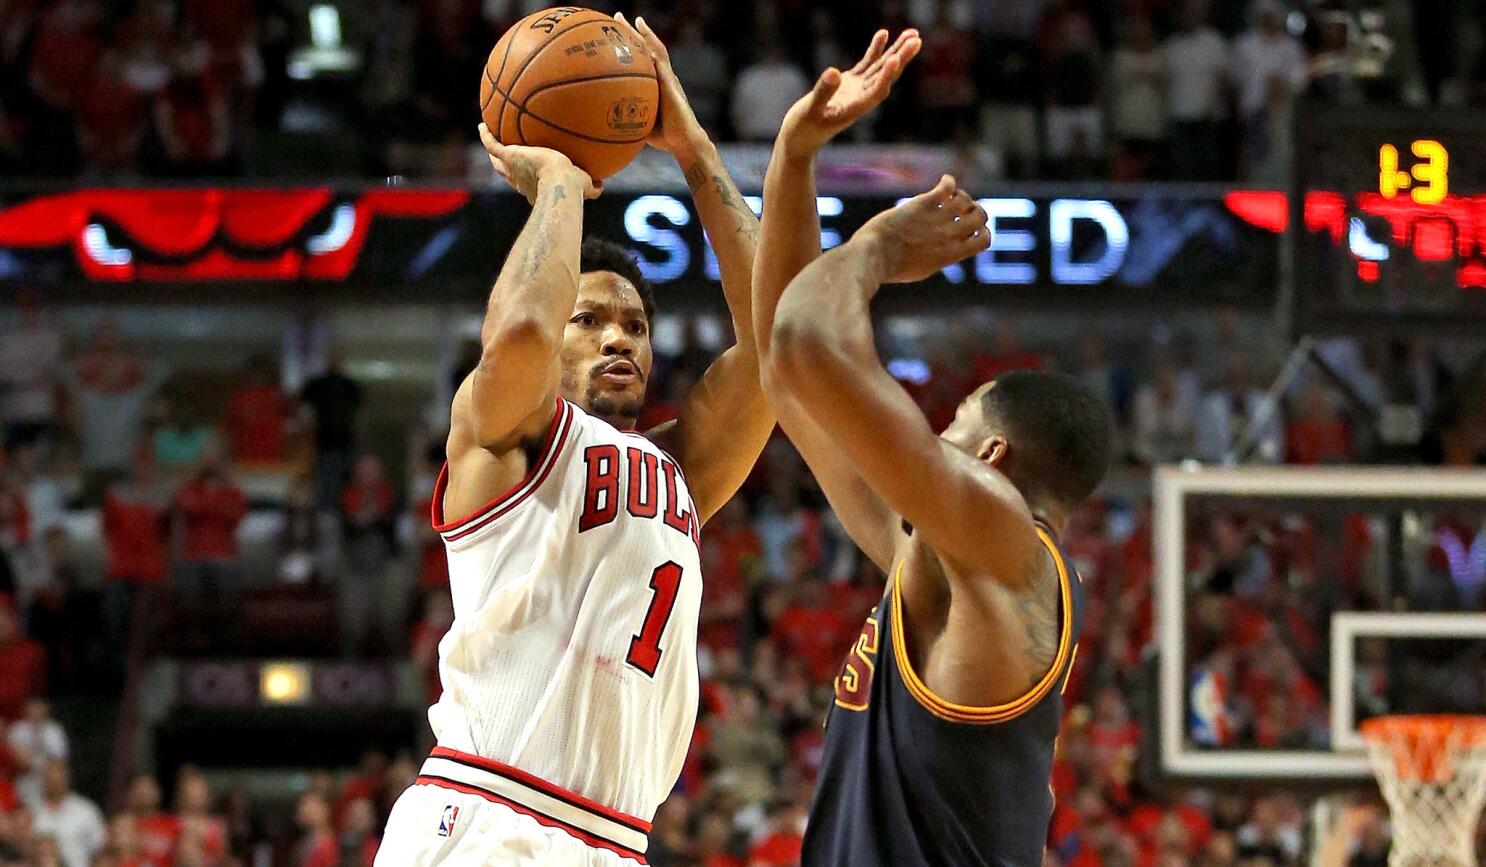 After Rose, who is the Bulls' No. 2 option?